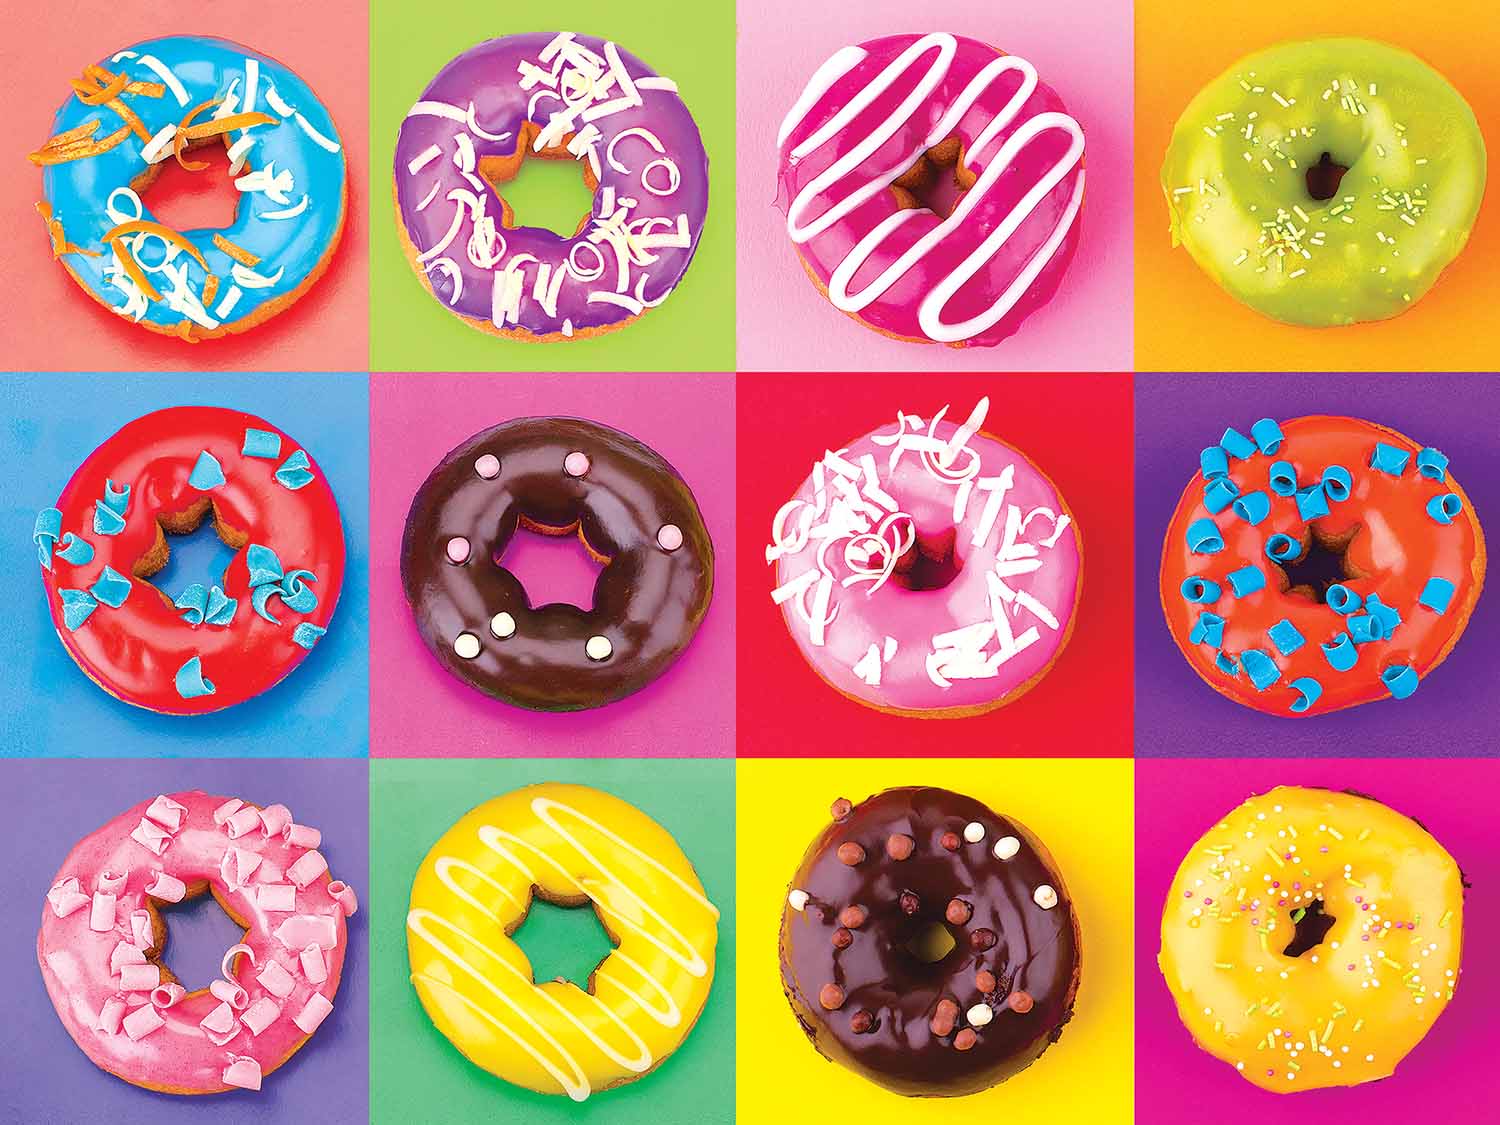 I Love Donuts - Scratch and Dent Dessert & Sweets Jigsaw Puzzle